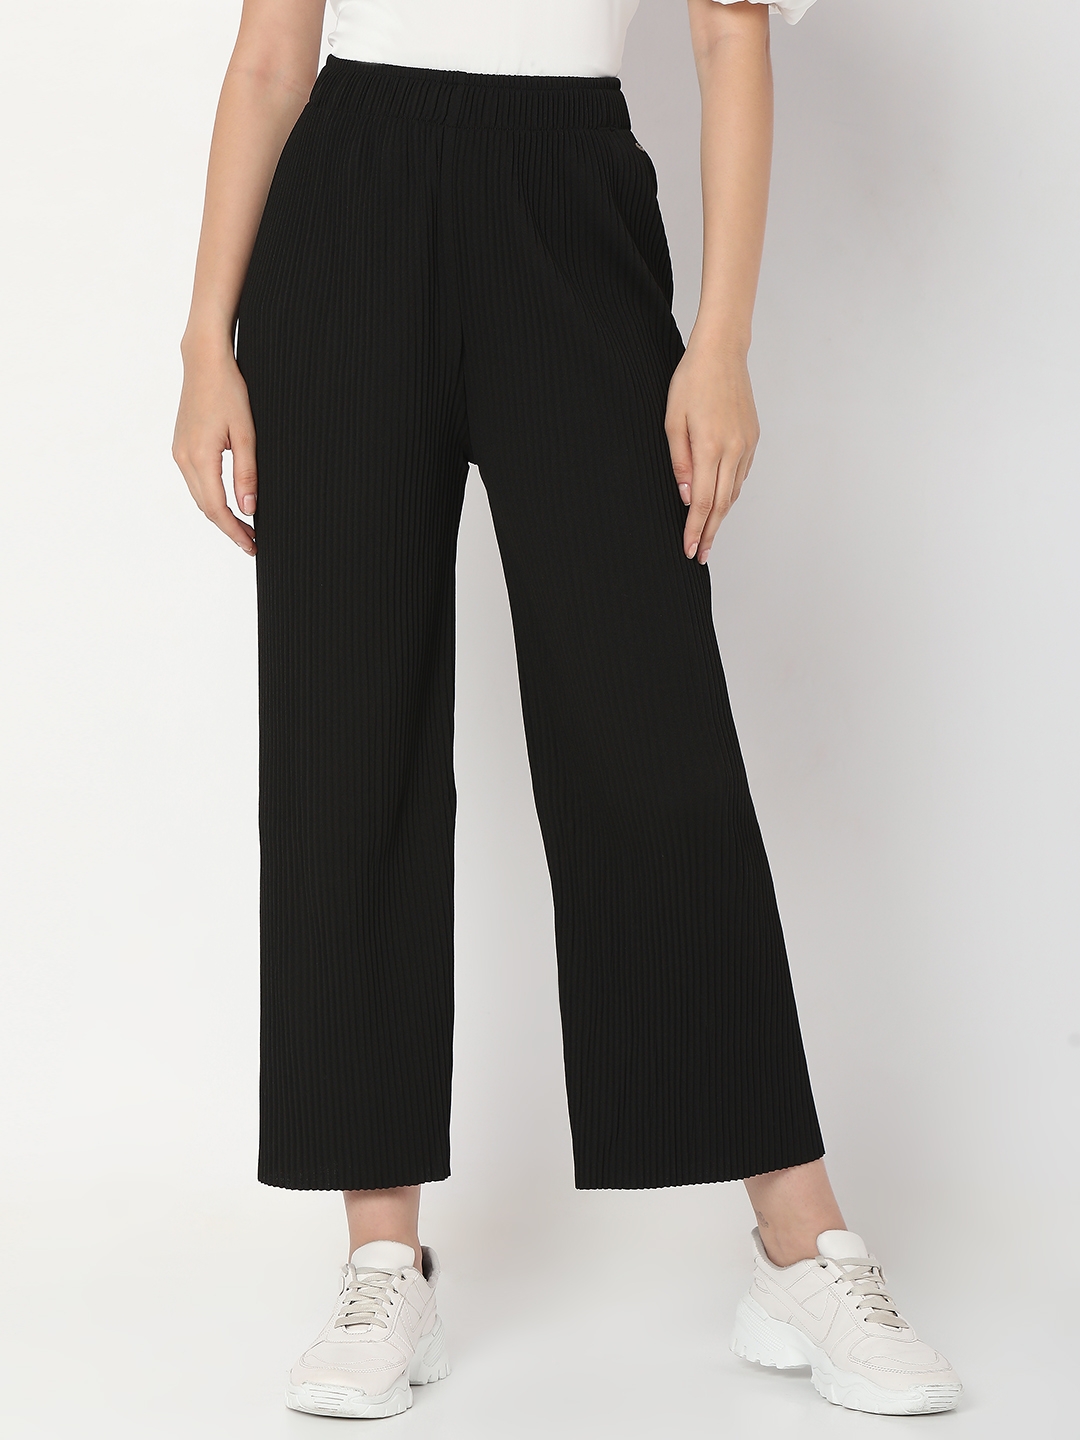 Women's Black Cotton Solid Trackpants